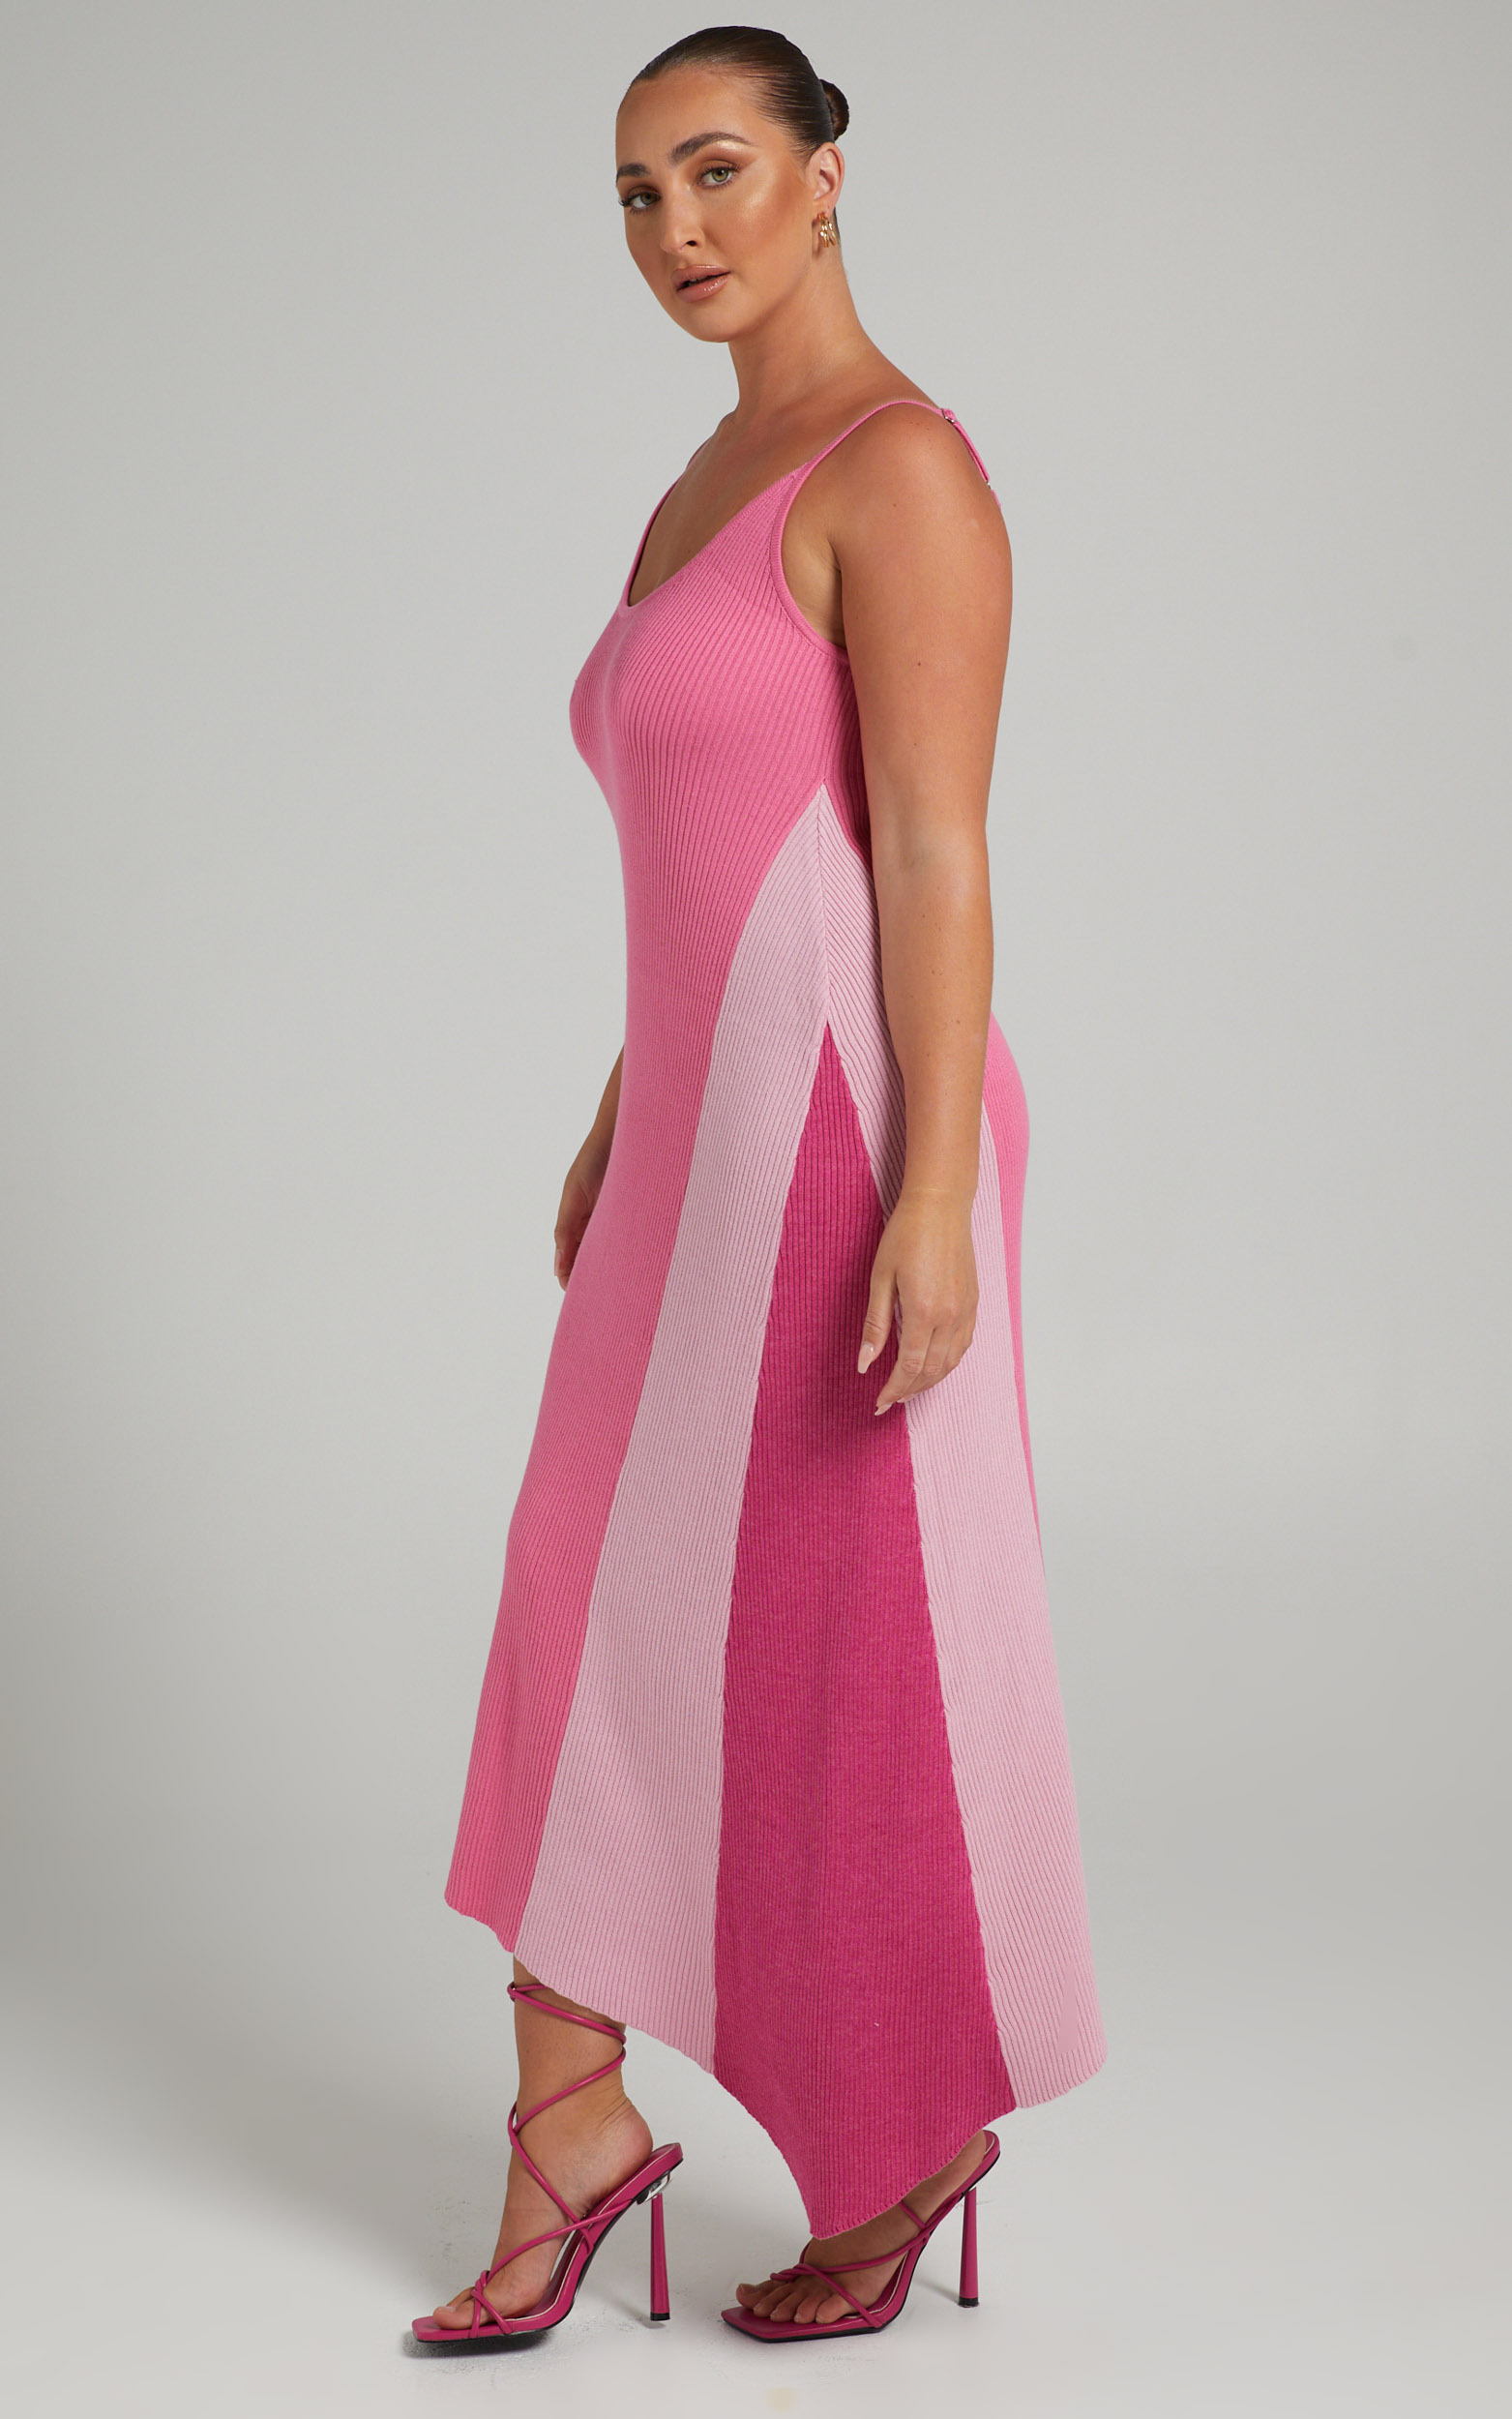 Claudia Knit Dress with Godet Side Panel in Pink - 06, PNK1, hi-res image number null